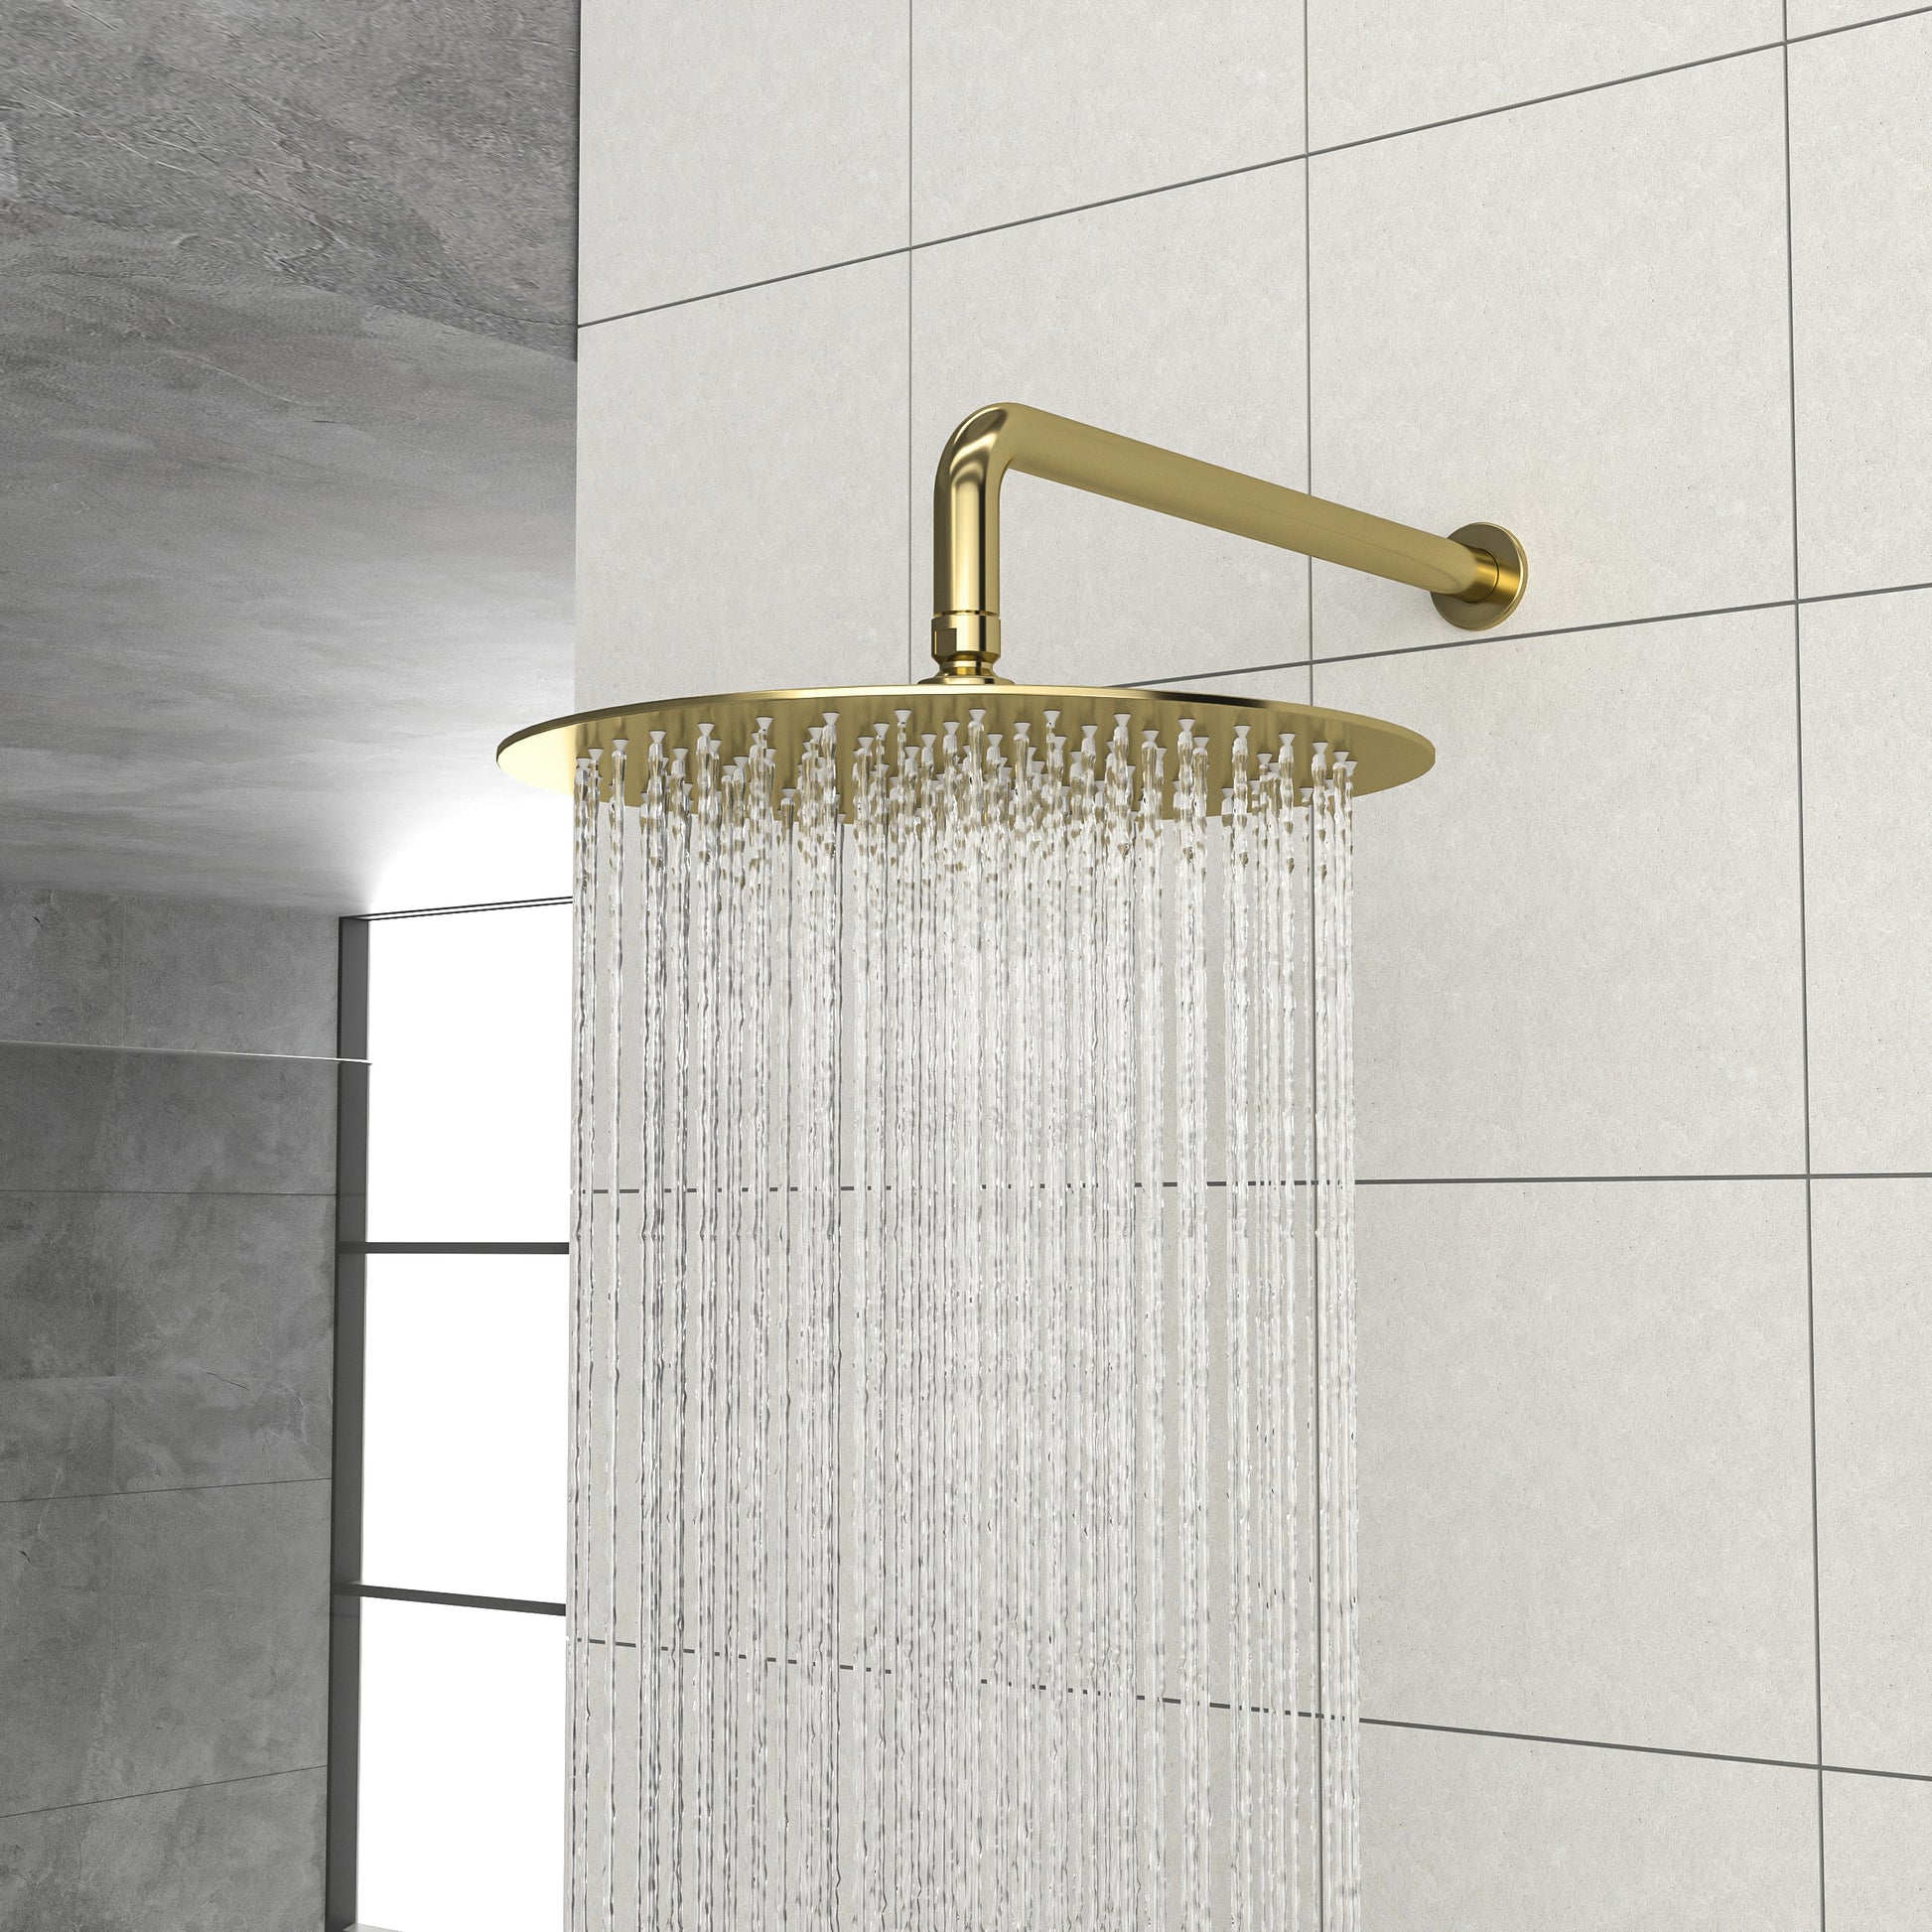 10" Rain Shower Head Systems, Dual Shower Heads gold-stainless steel